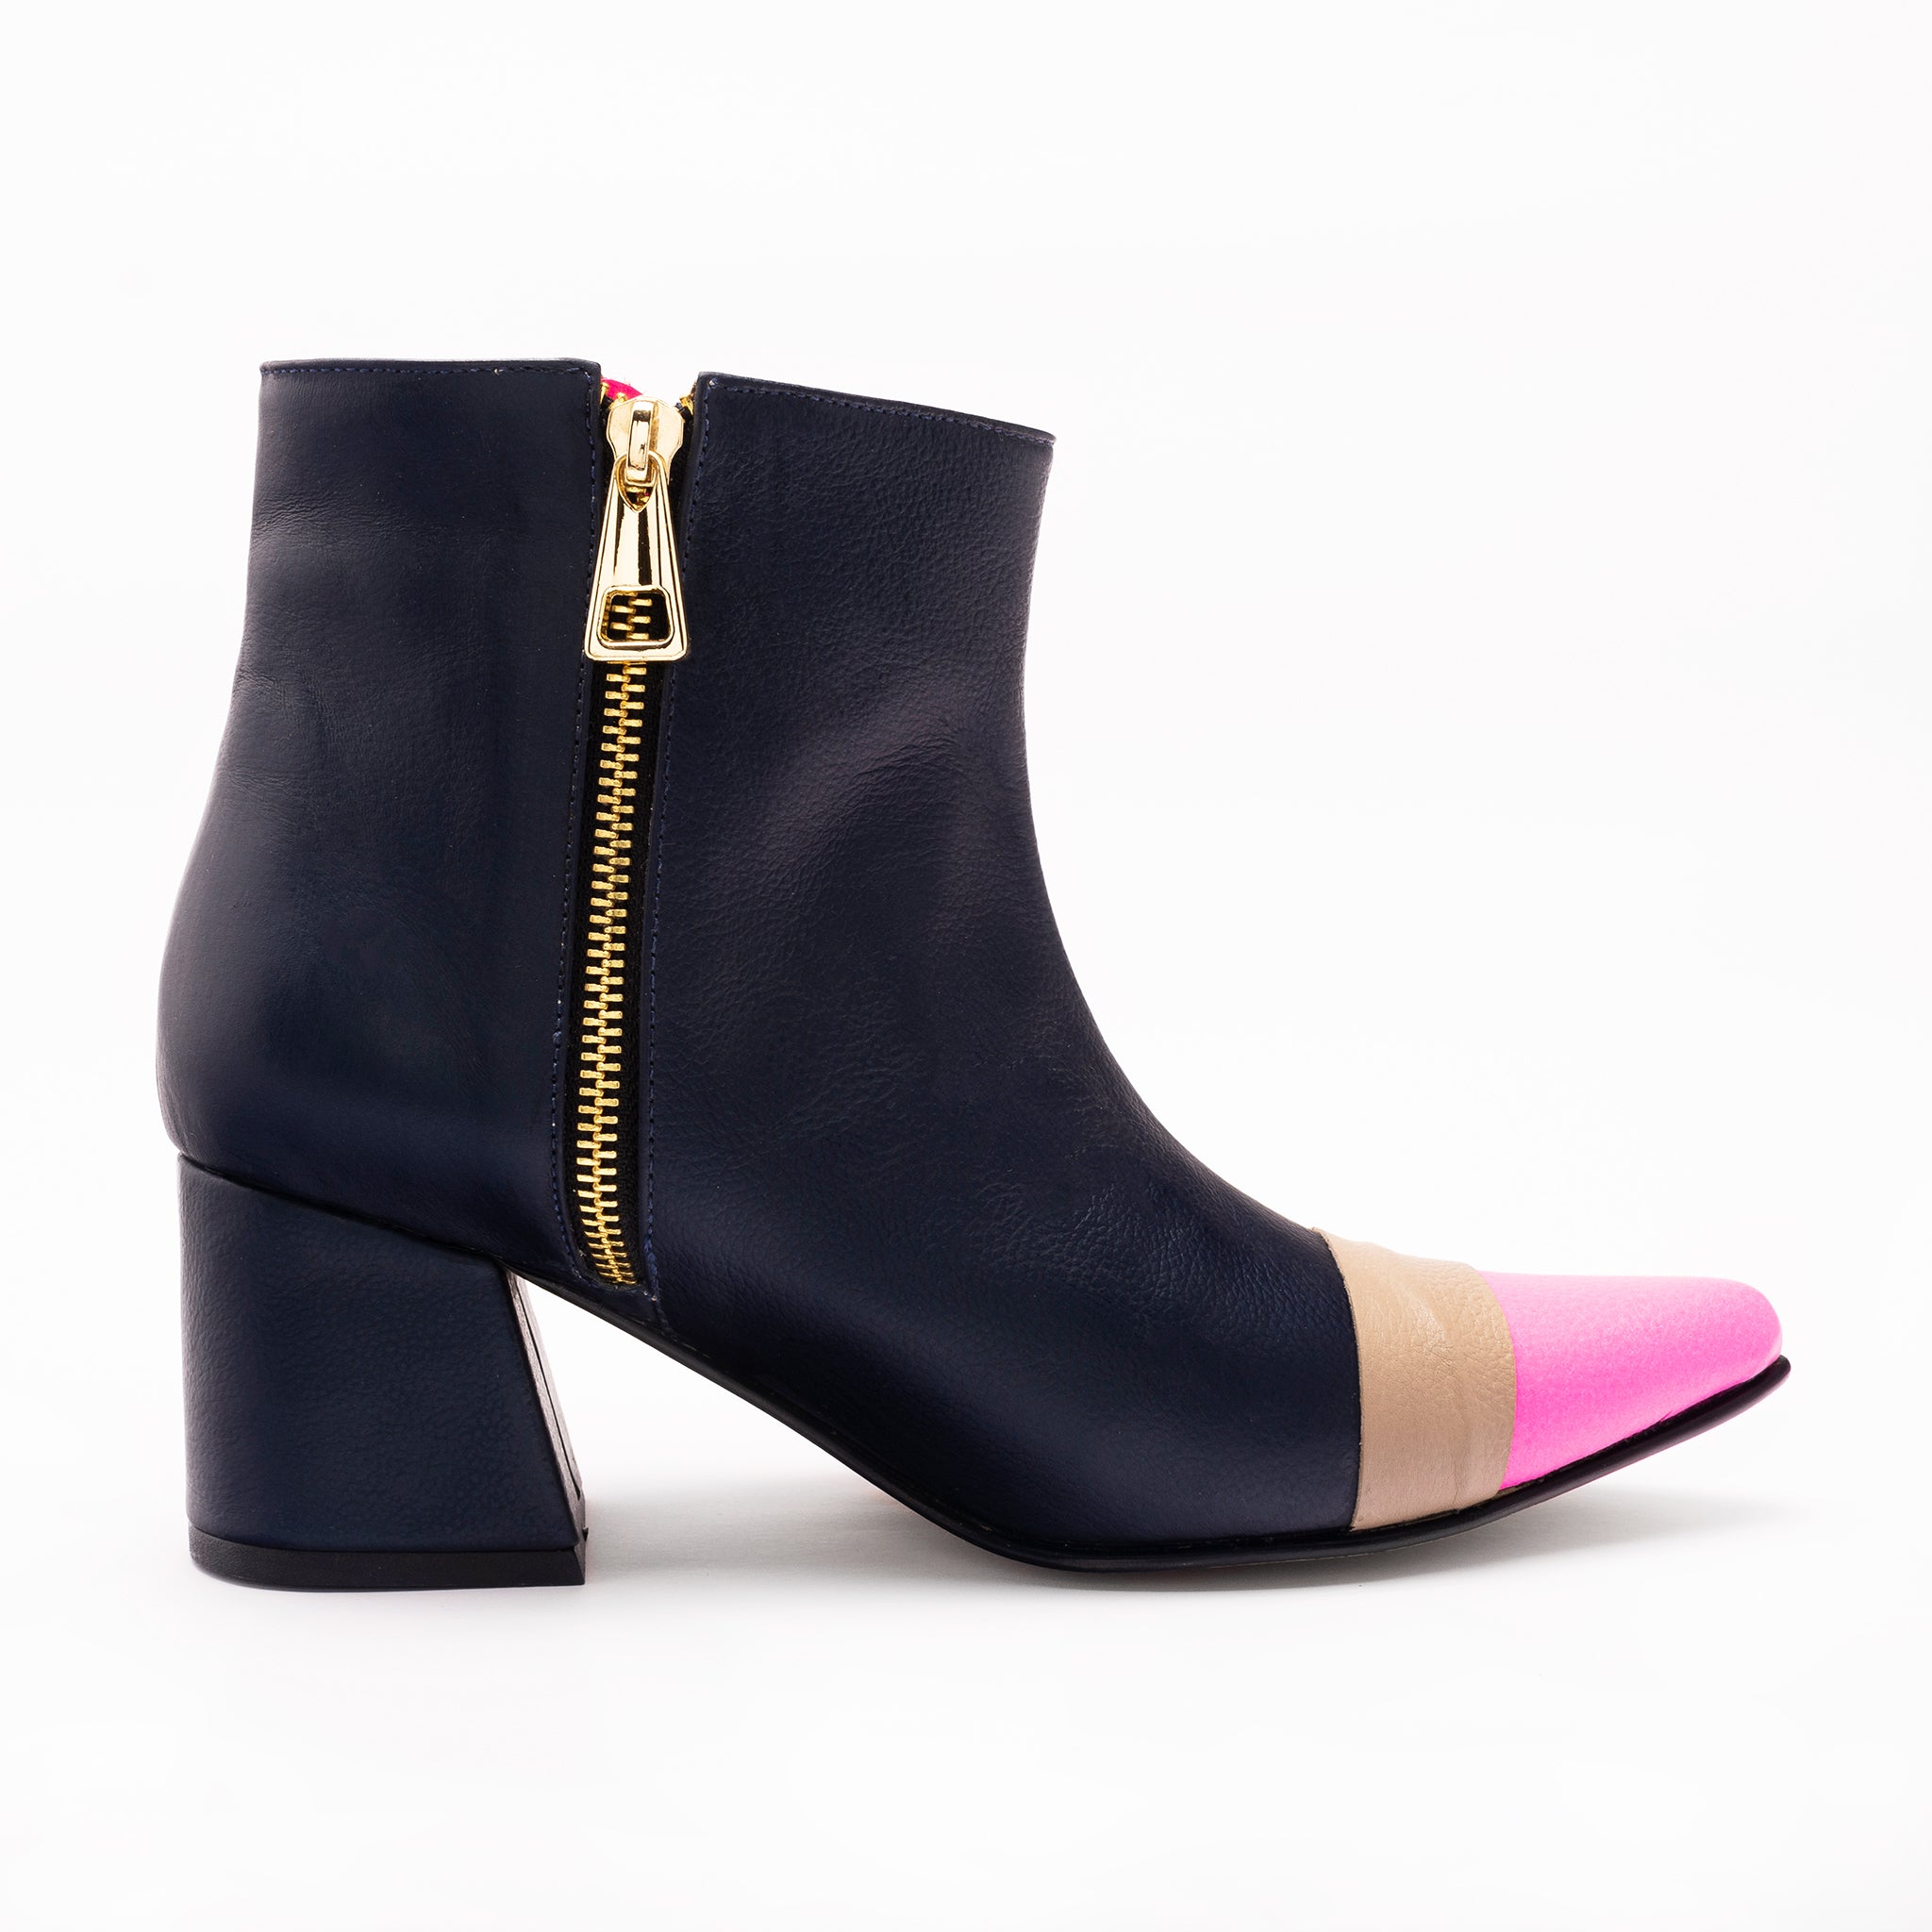 ANKLE boots - NAVY blue + ROSA chicle  NEÓN + cocoa  -